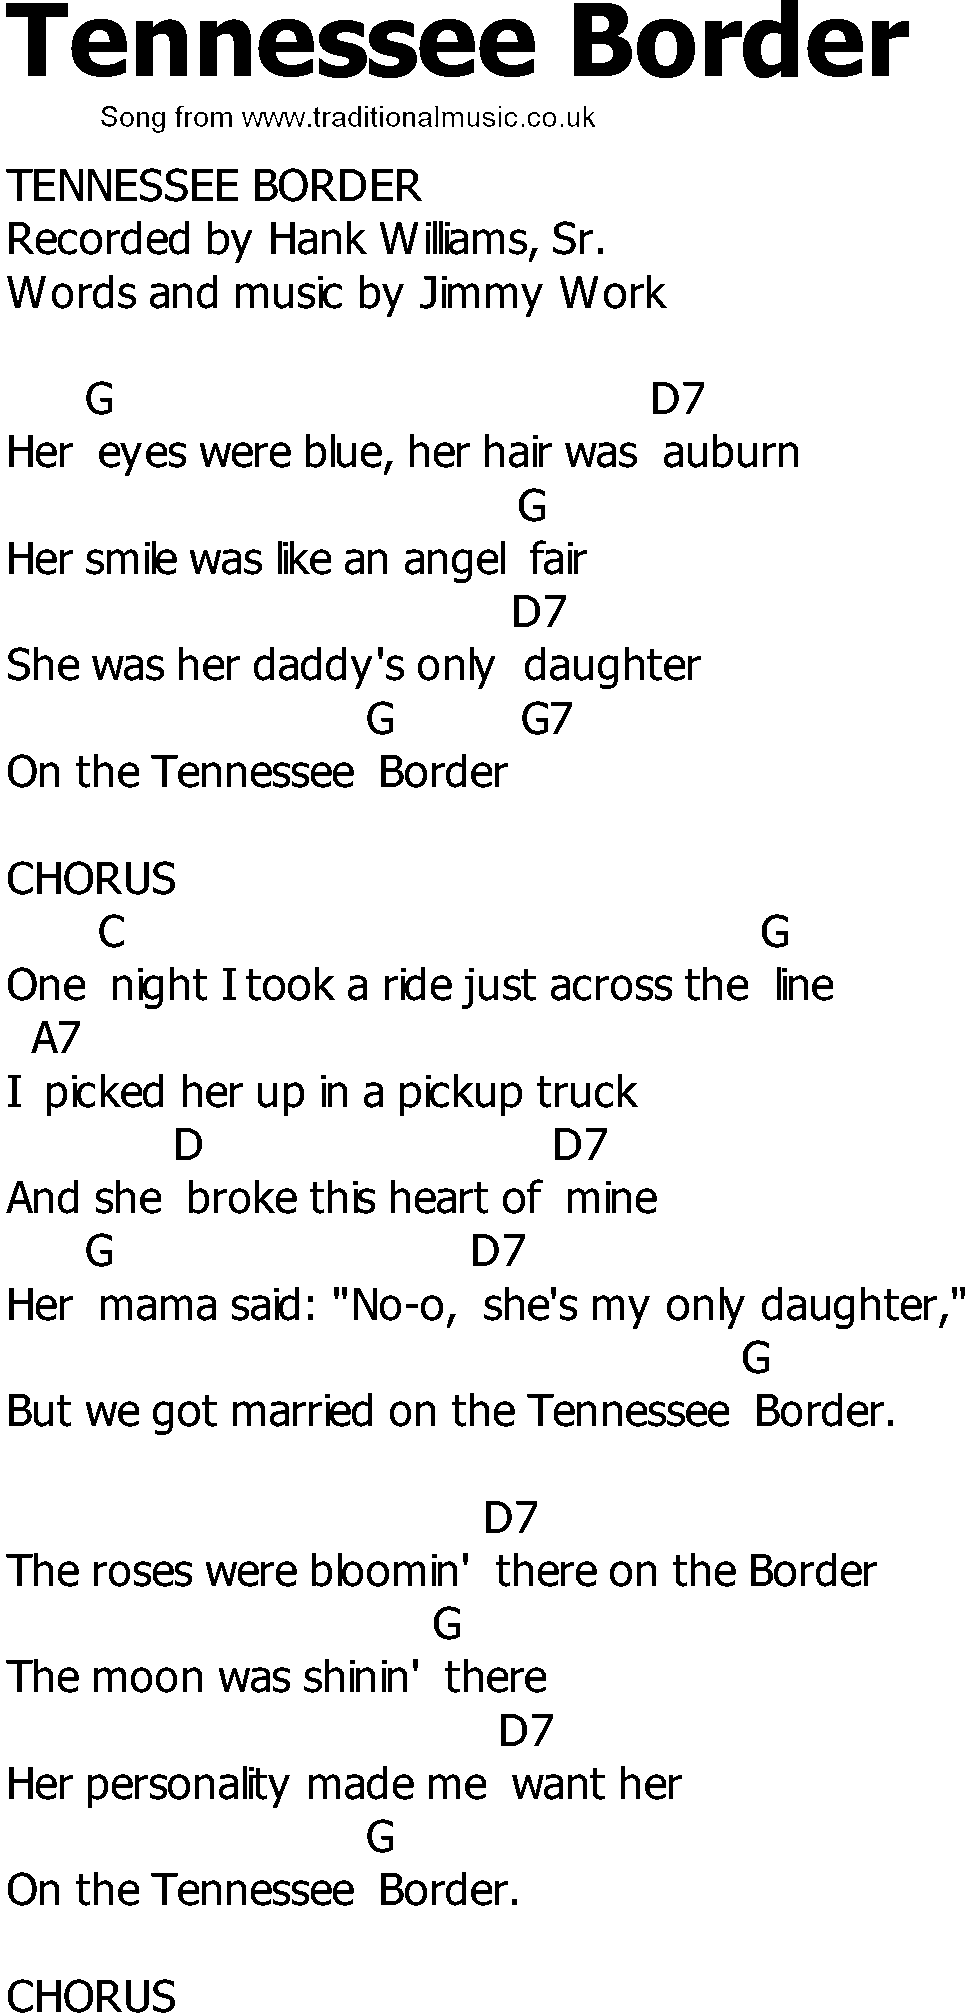 Old Country song lyrics with chords - Tennessee Border